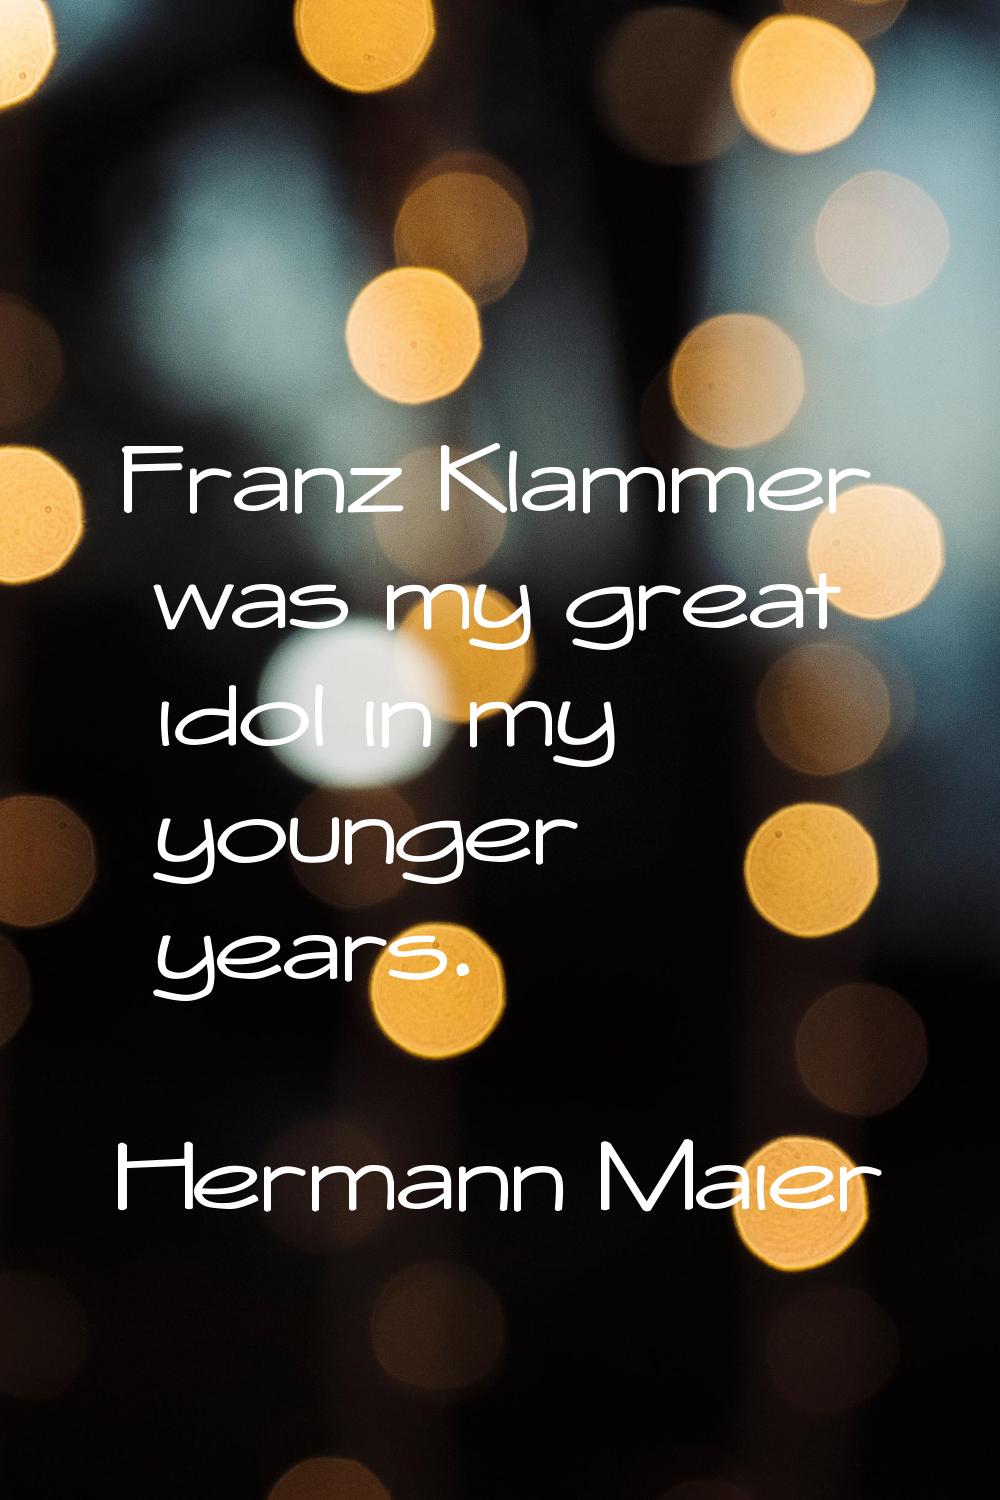 Franz Klammer was my great idol in my younger years.